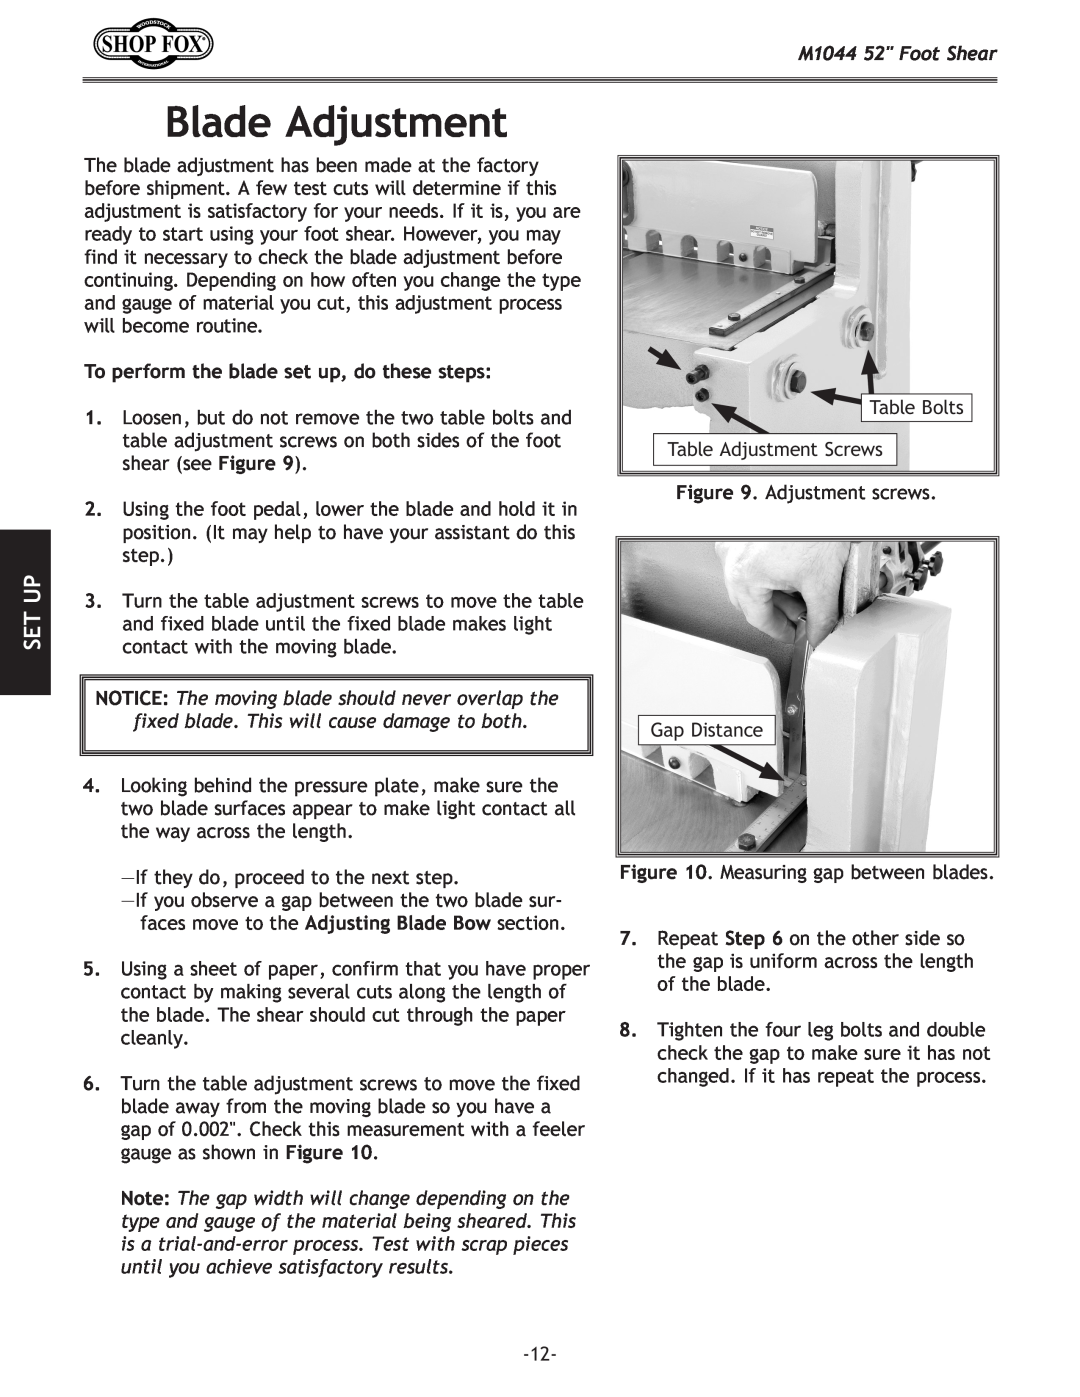 Woodstock manual Blade Adjustment, To perform the blade set up, do these steps, Set Up, M1044 52 Foot Shear 